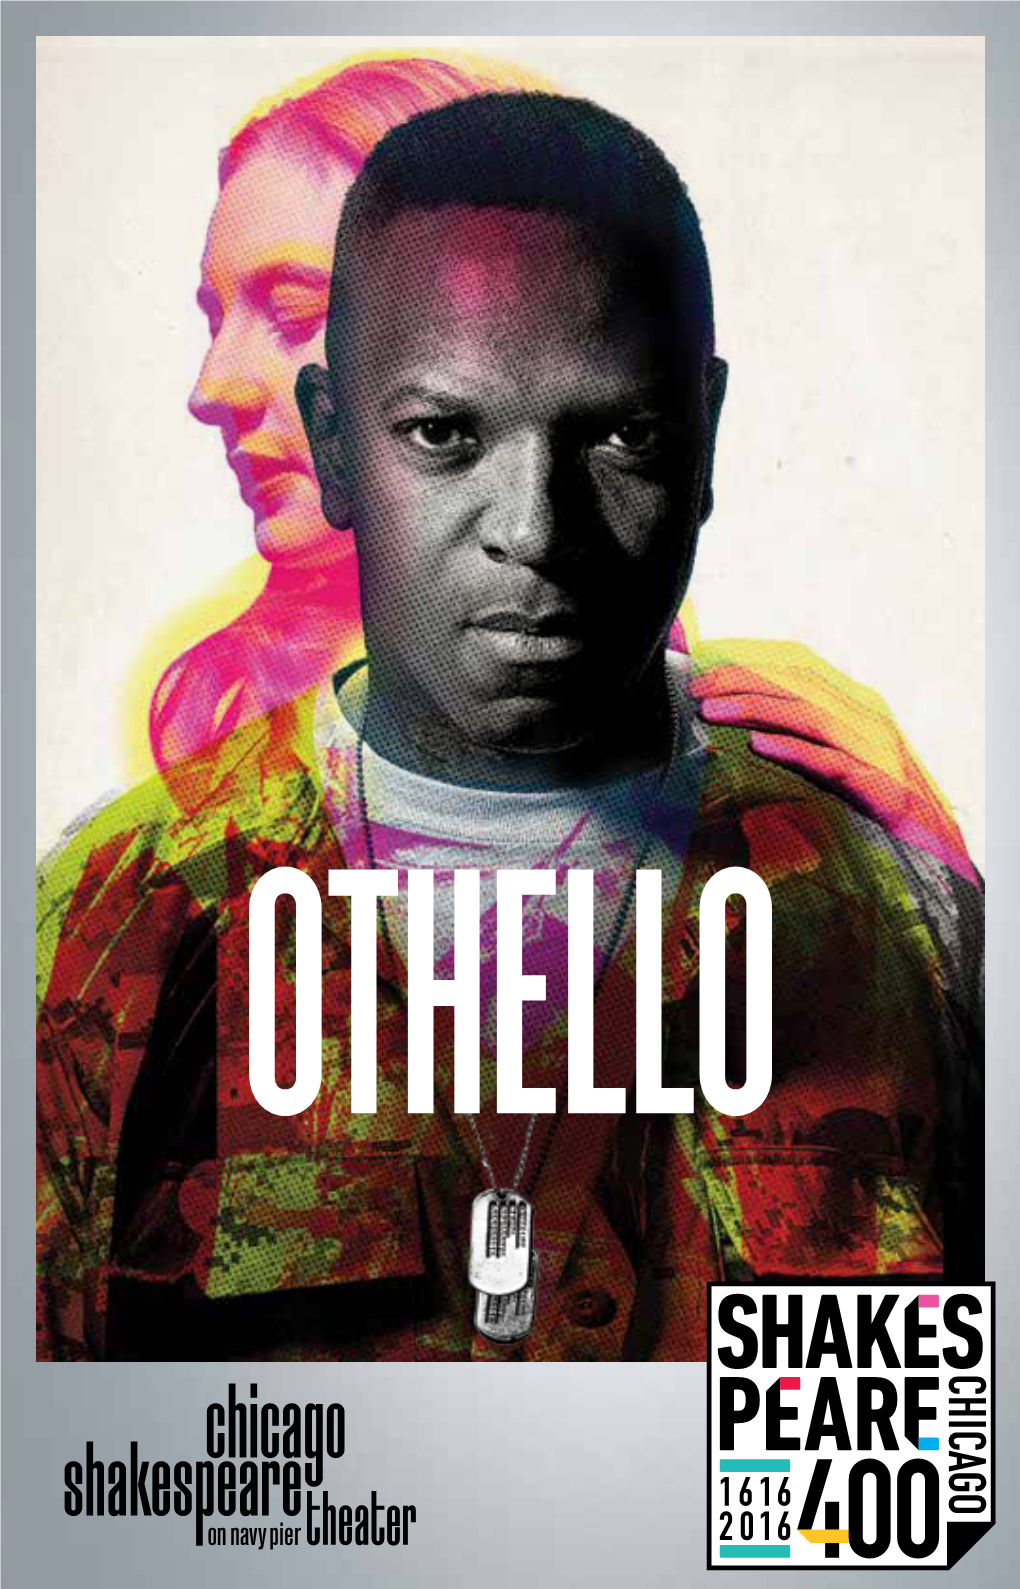 Chicago Shakespeare Theater OTHELLO from OUR SHAKESPEARE CHICAGO PARTNERS Contents LYRICOPERA.ORG | 312.827.5600